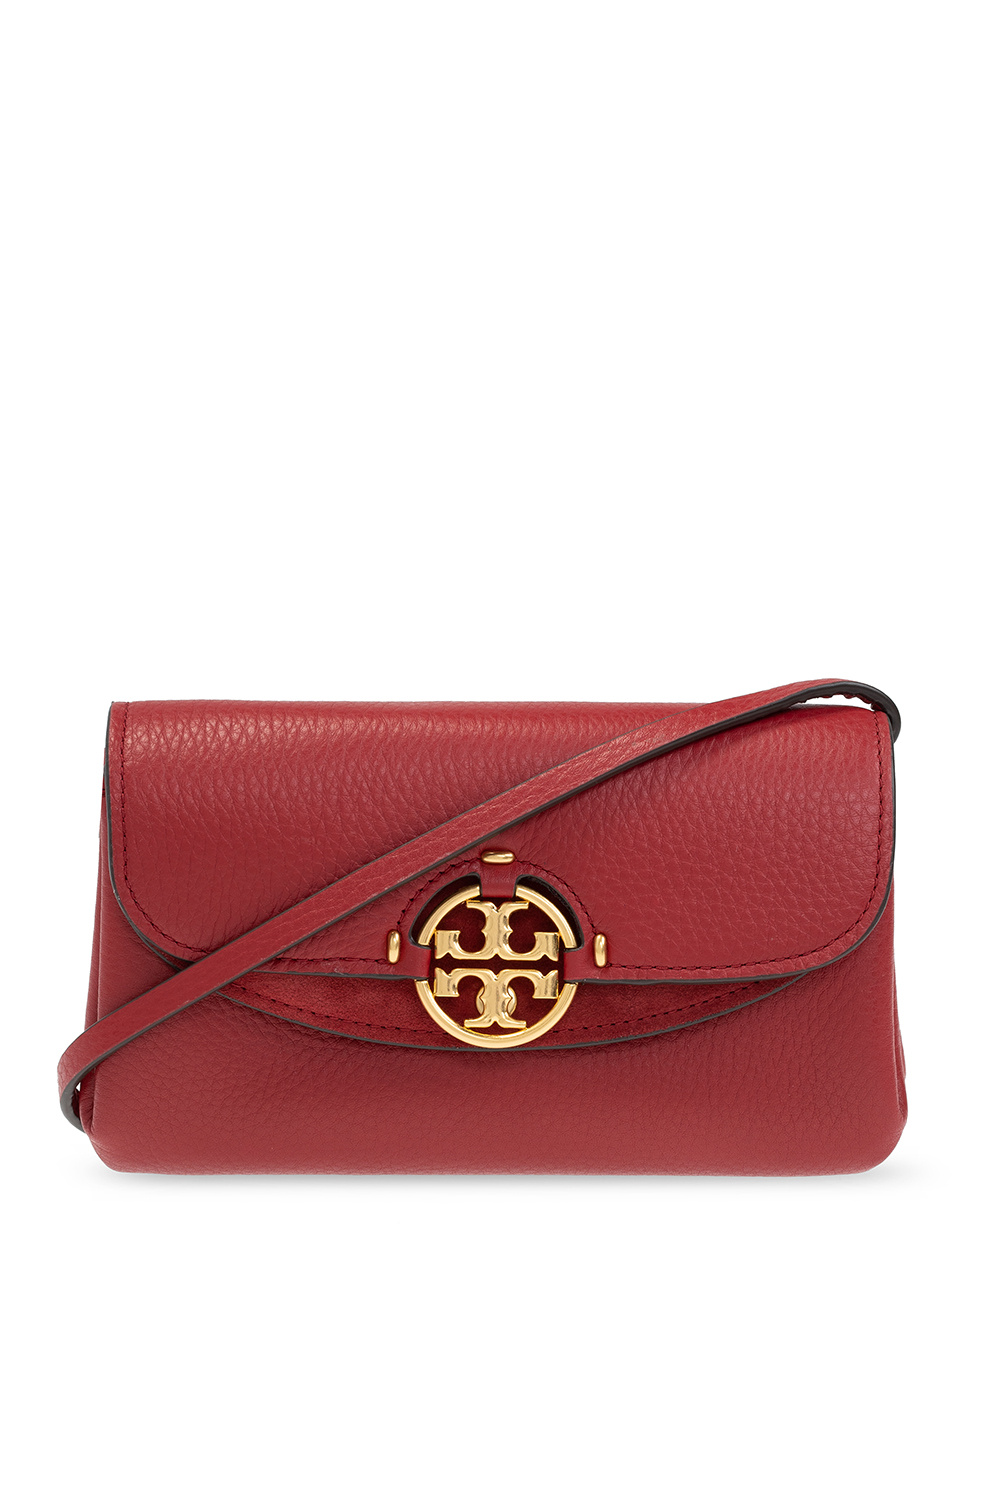 Tory Burch The MSN Bag is a perfect casual